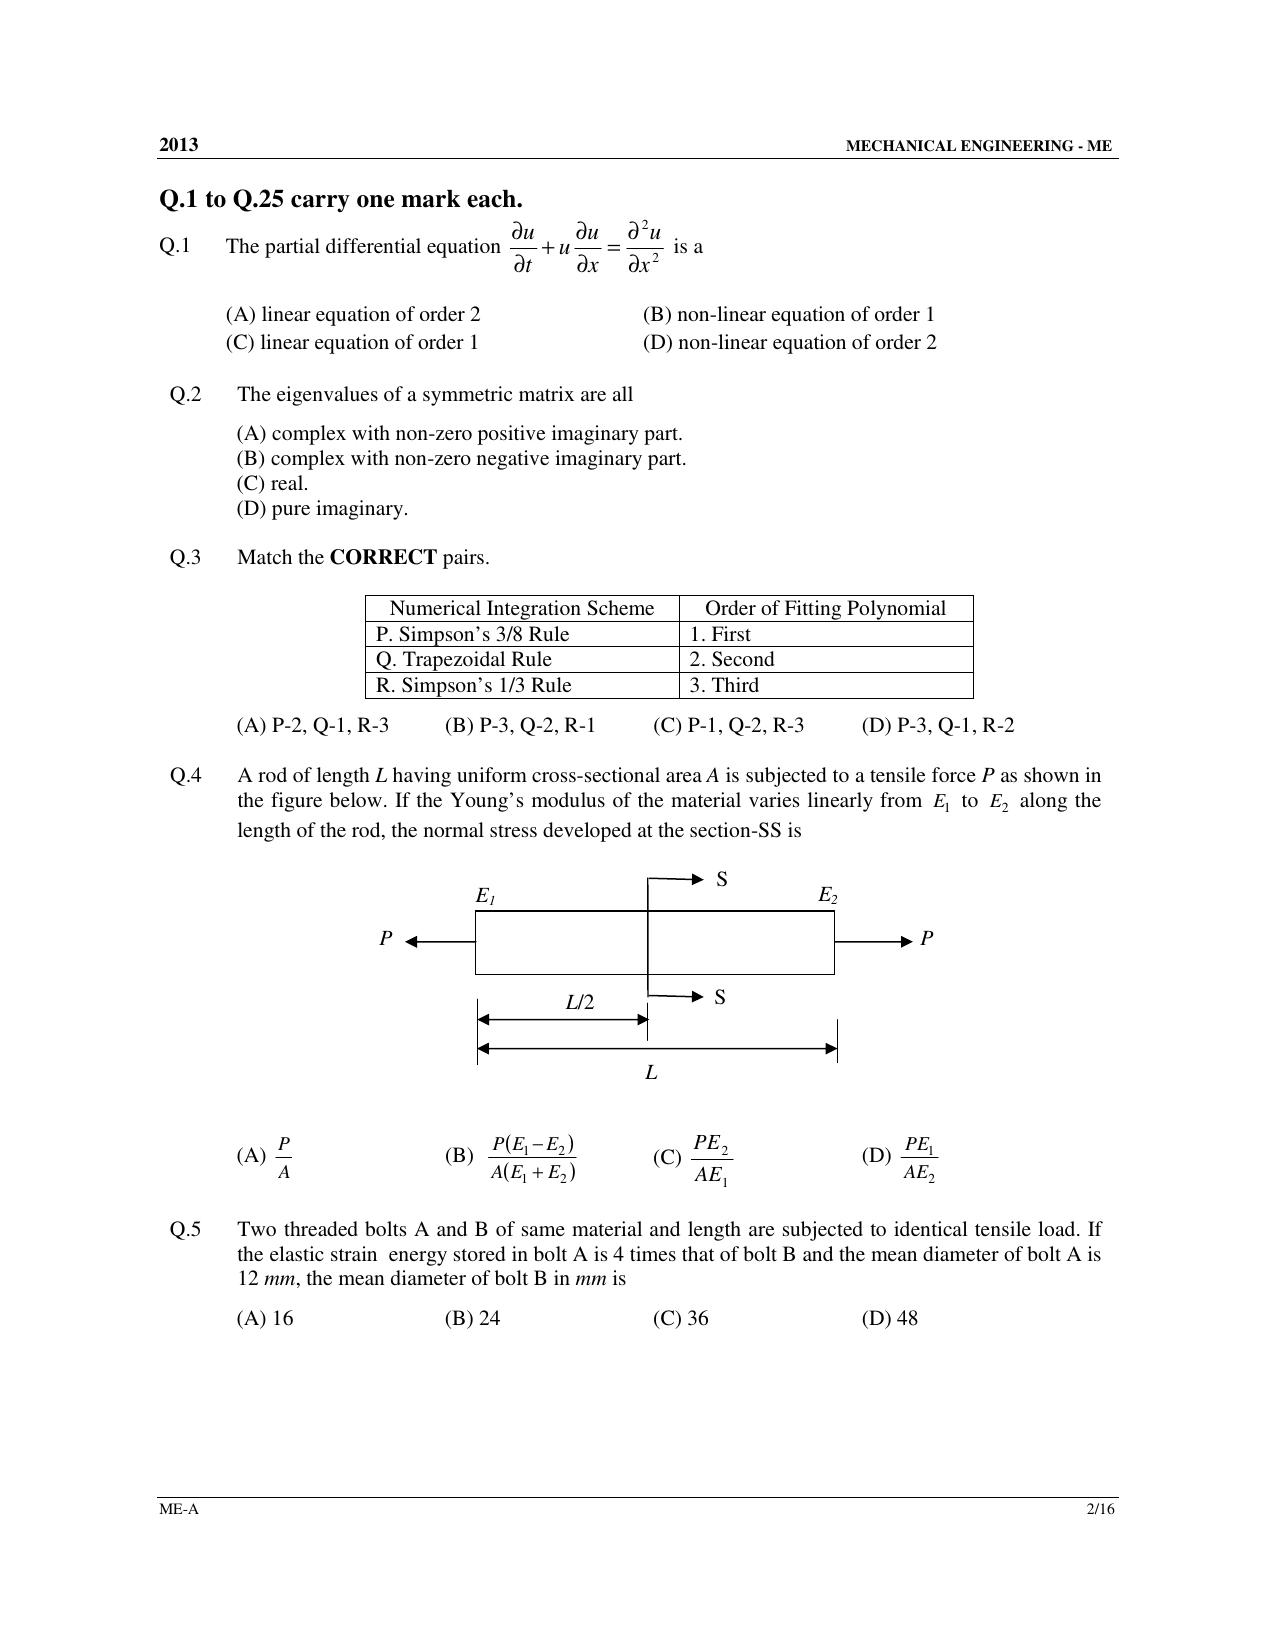 GATE 2013 Mechanical Engineering (ME) Question Paper with Answer Key - Page 3